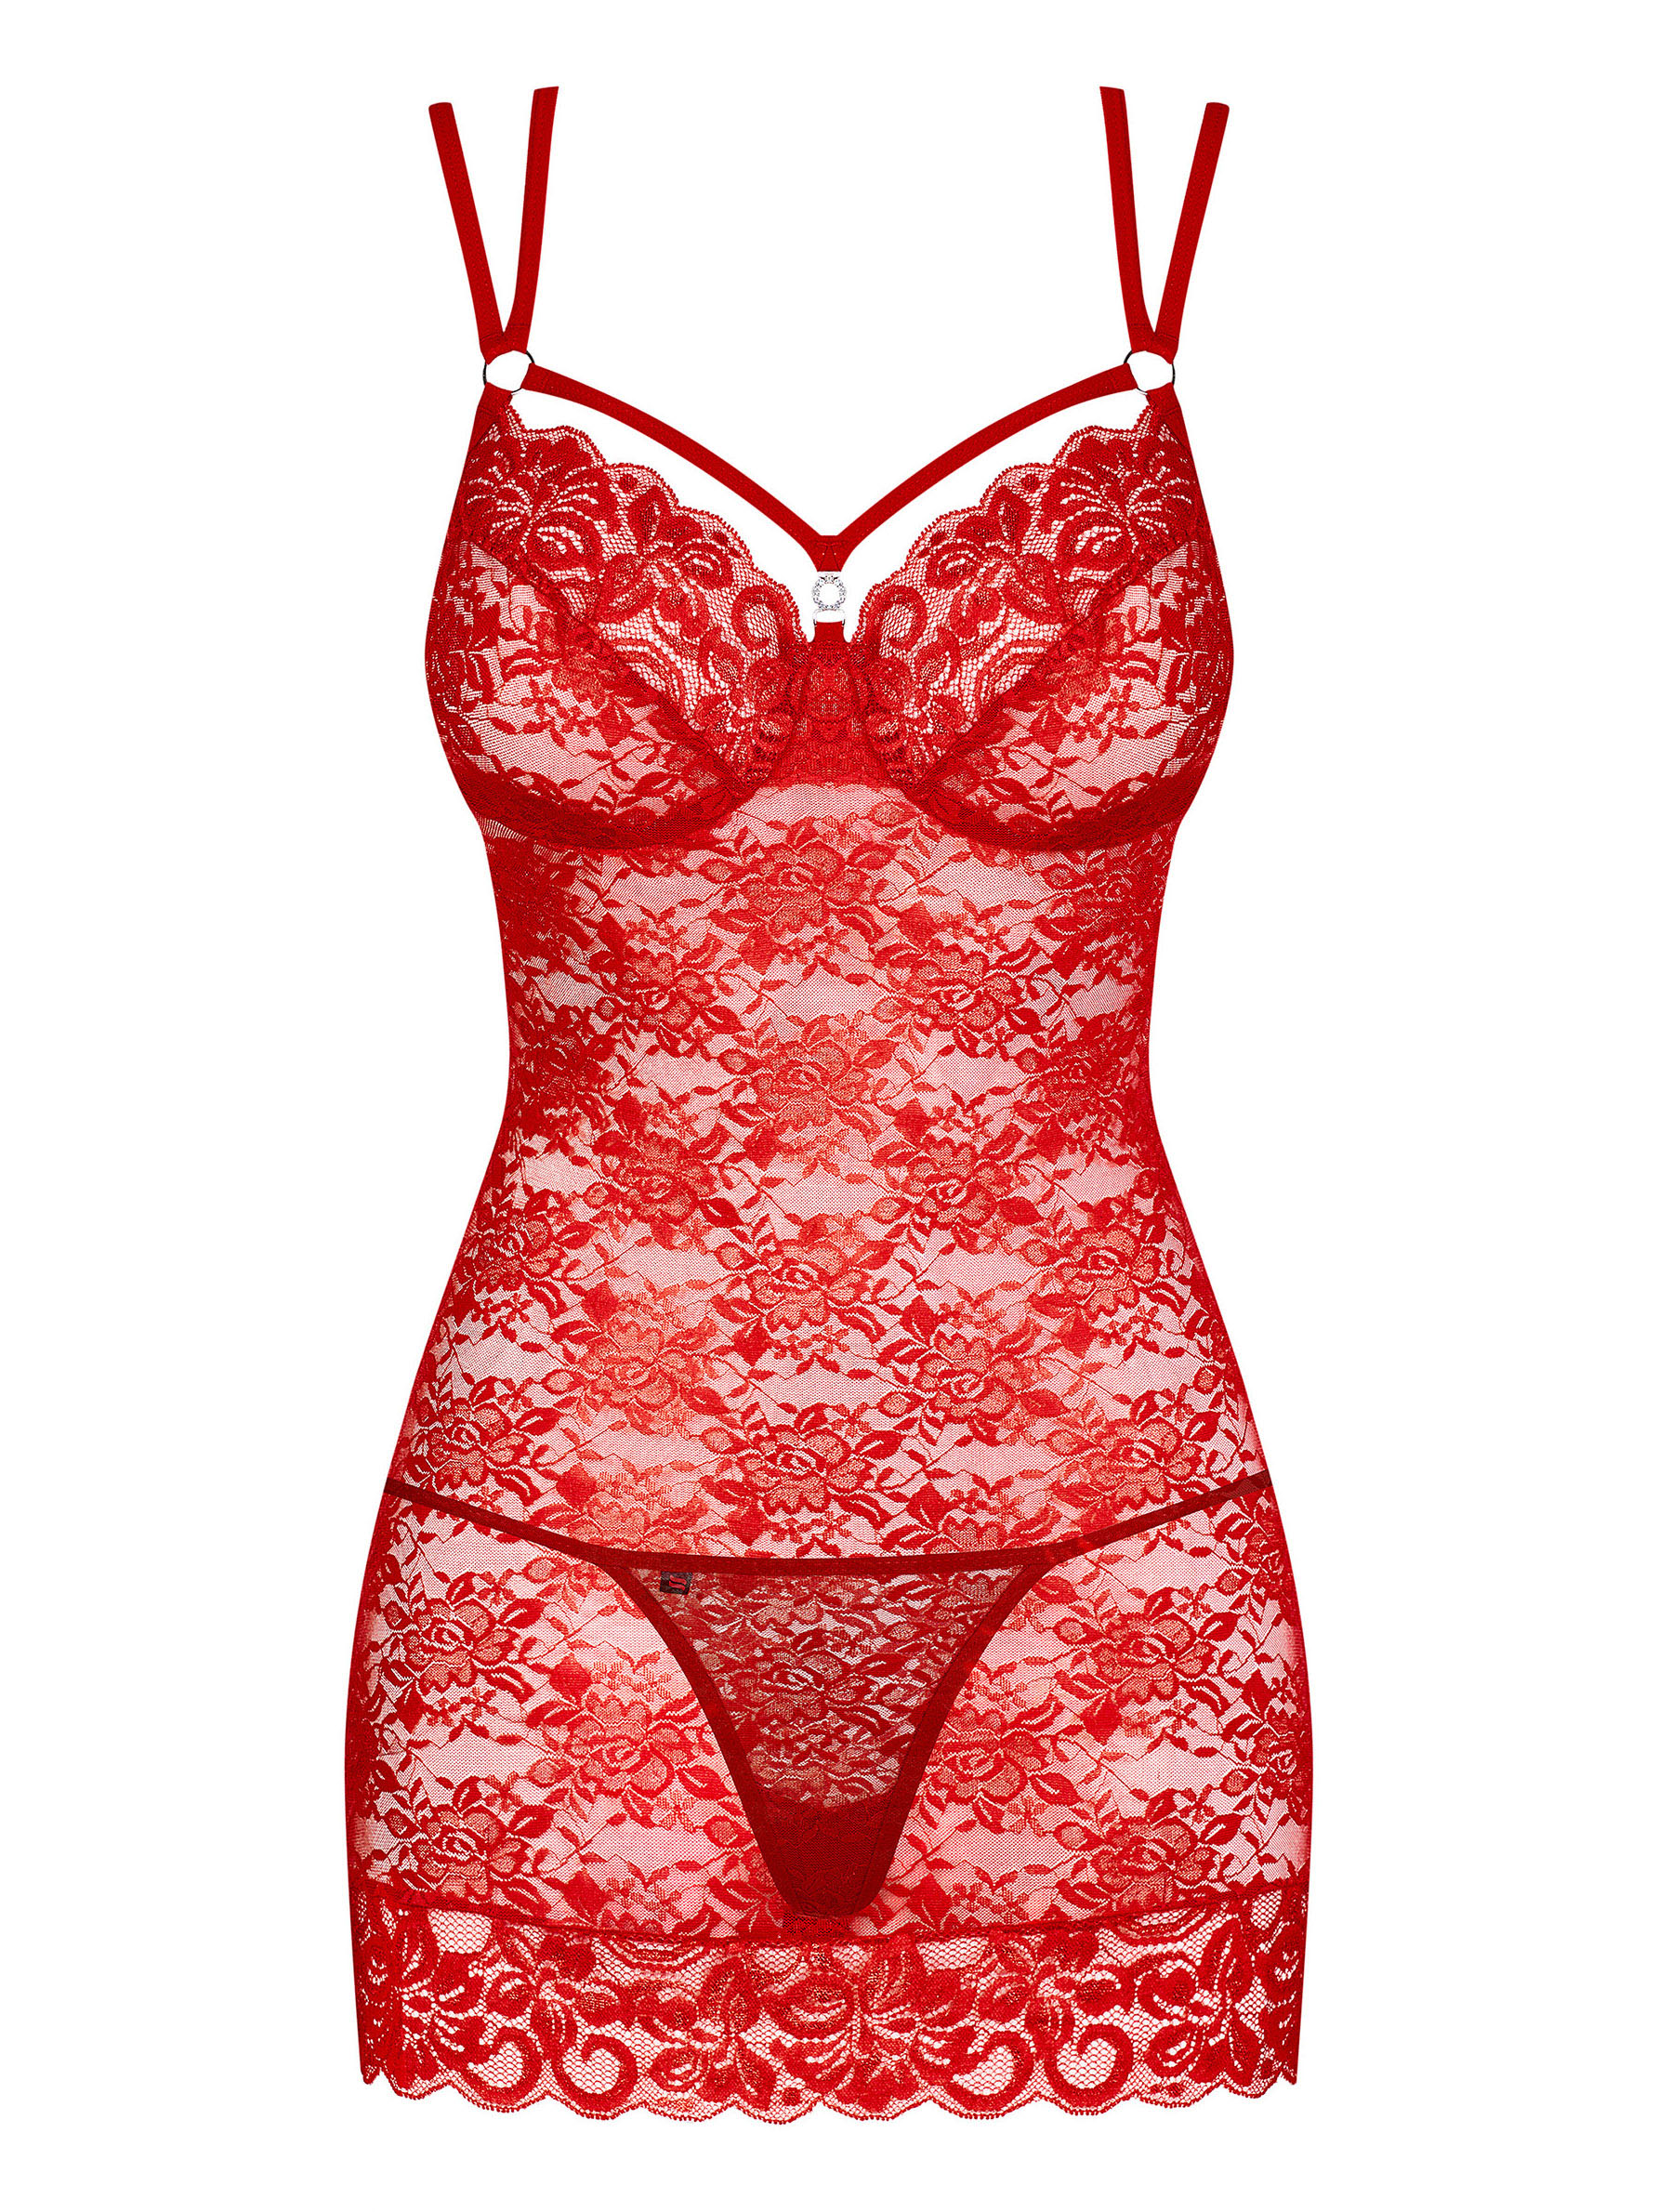 Women's red chemise & thong Obsessive 860-CHE-3 #5